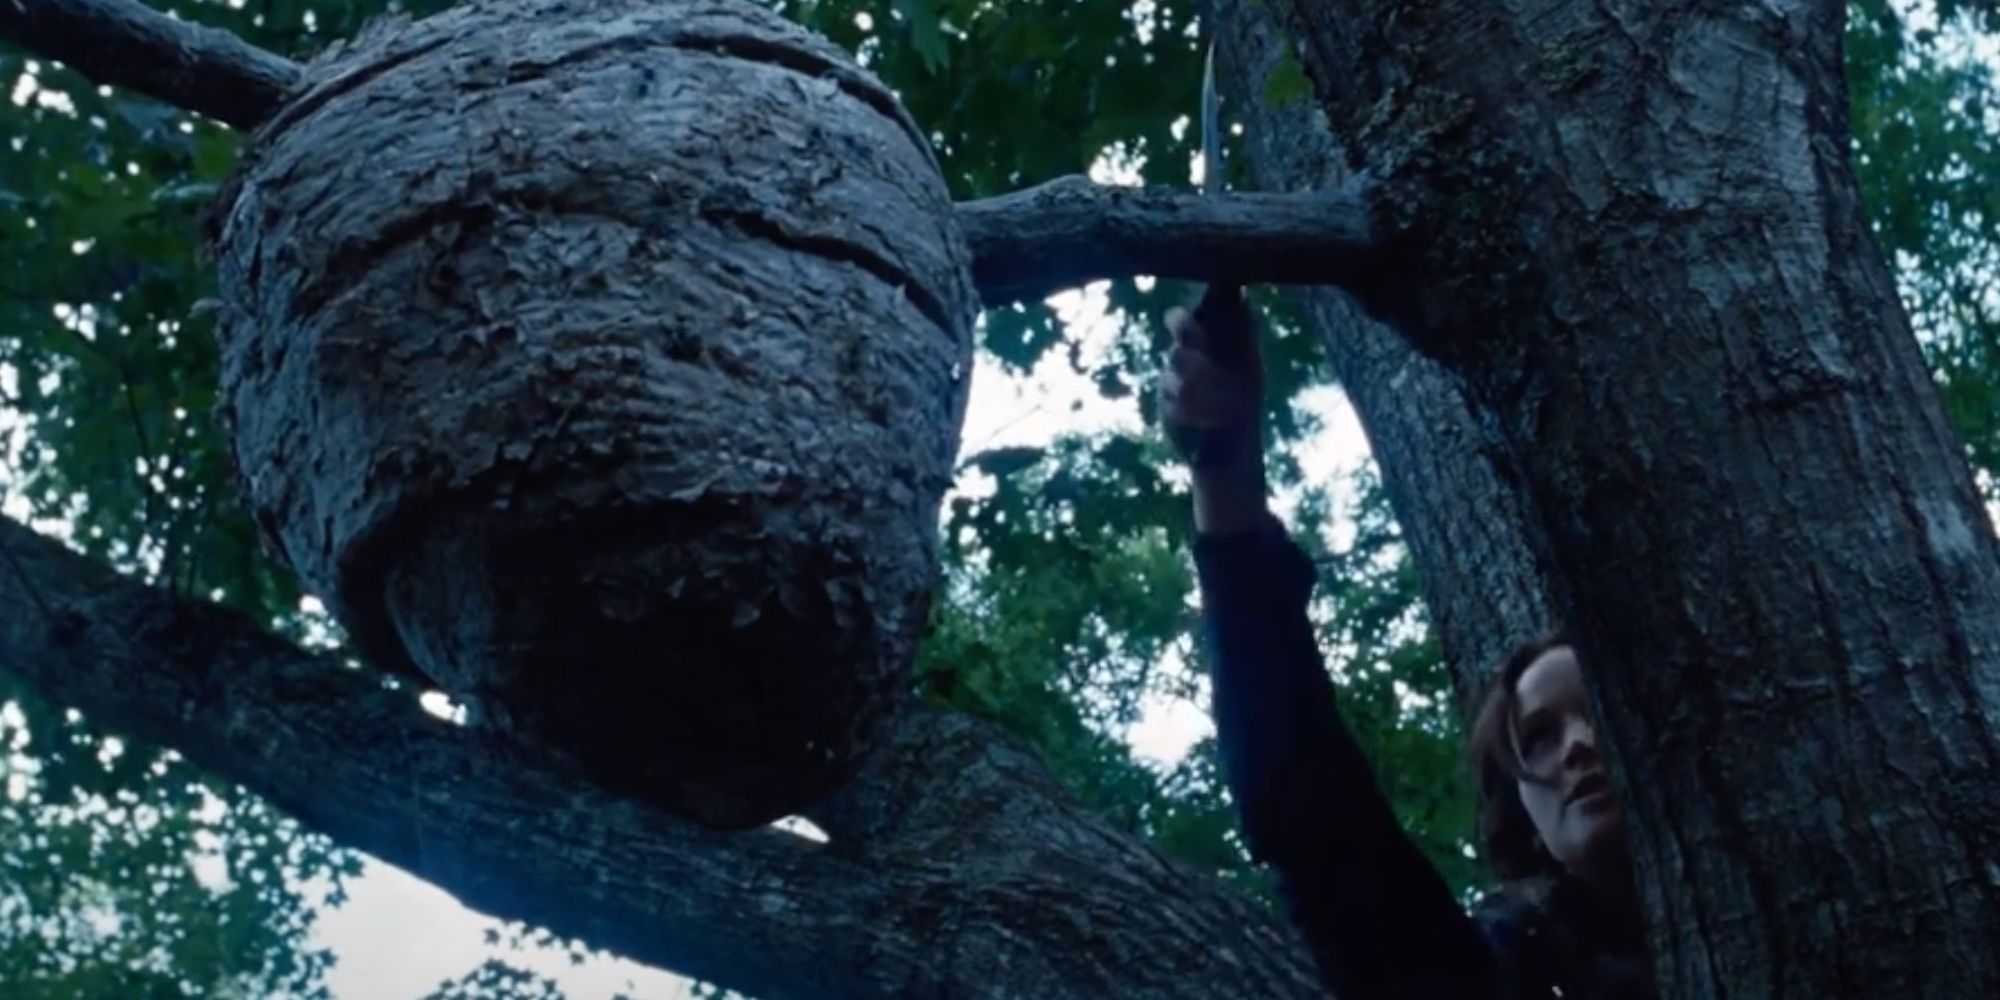 Katniss cuts a tracker jacker nest from the tree in the Hunger Games.